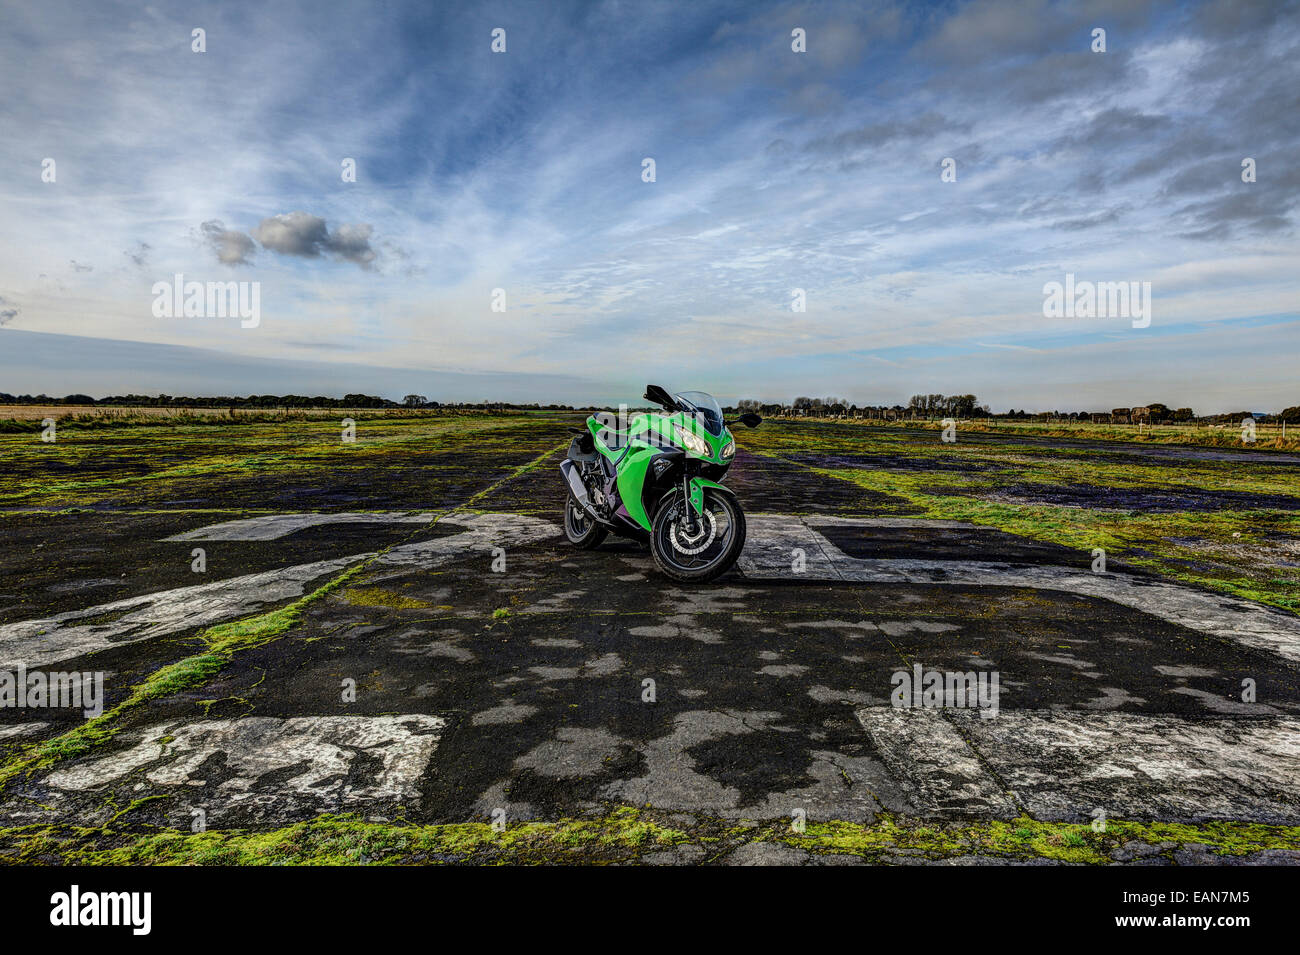 Green sports motorcycle parked on disused airfield runway Stock Photo